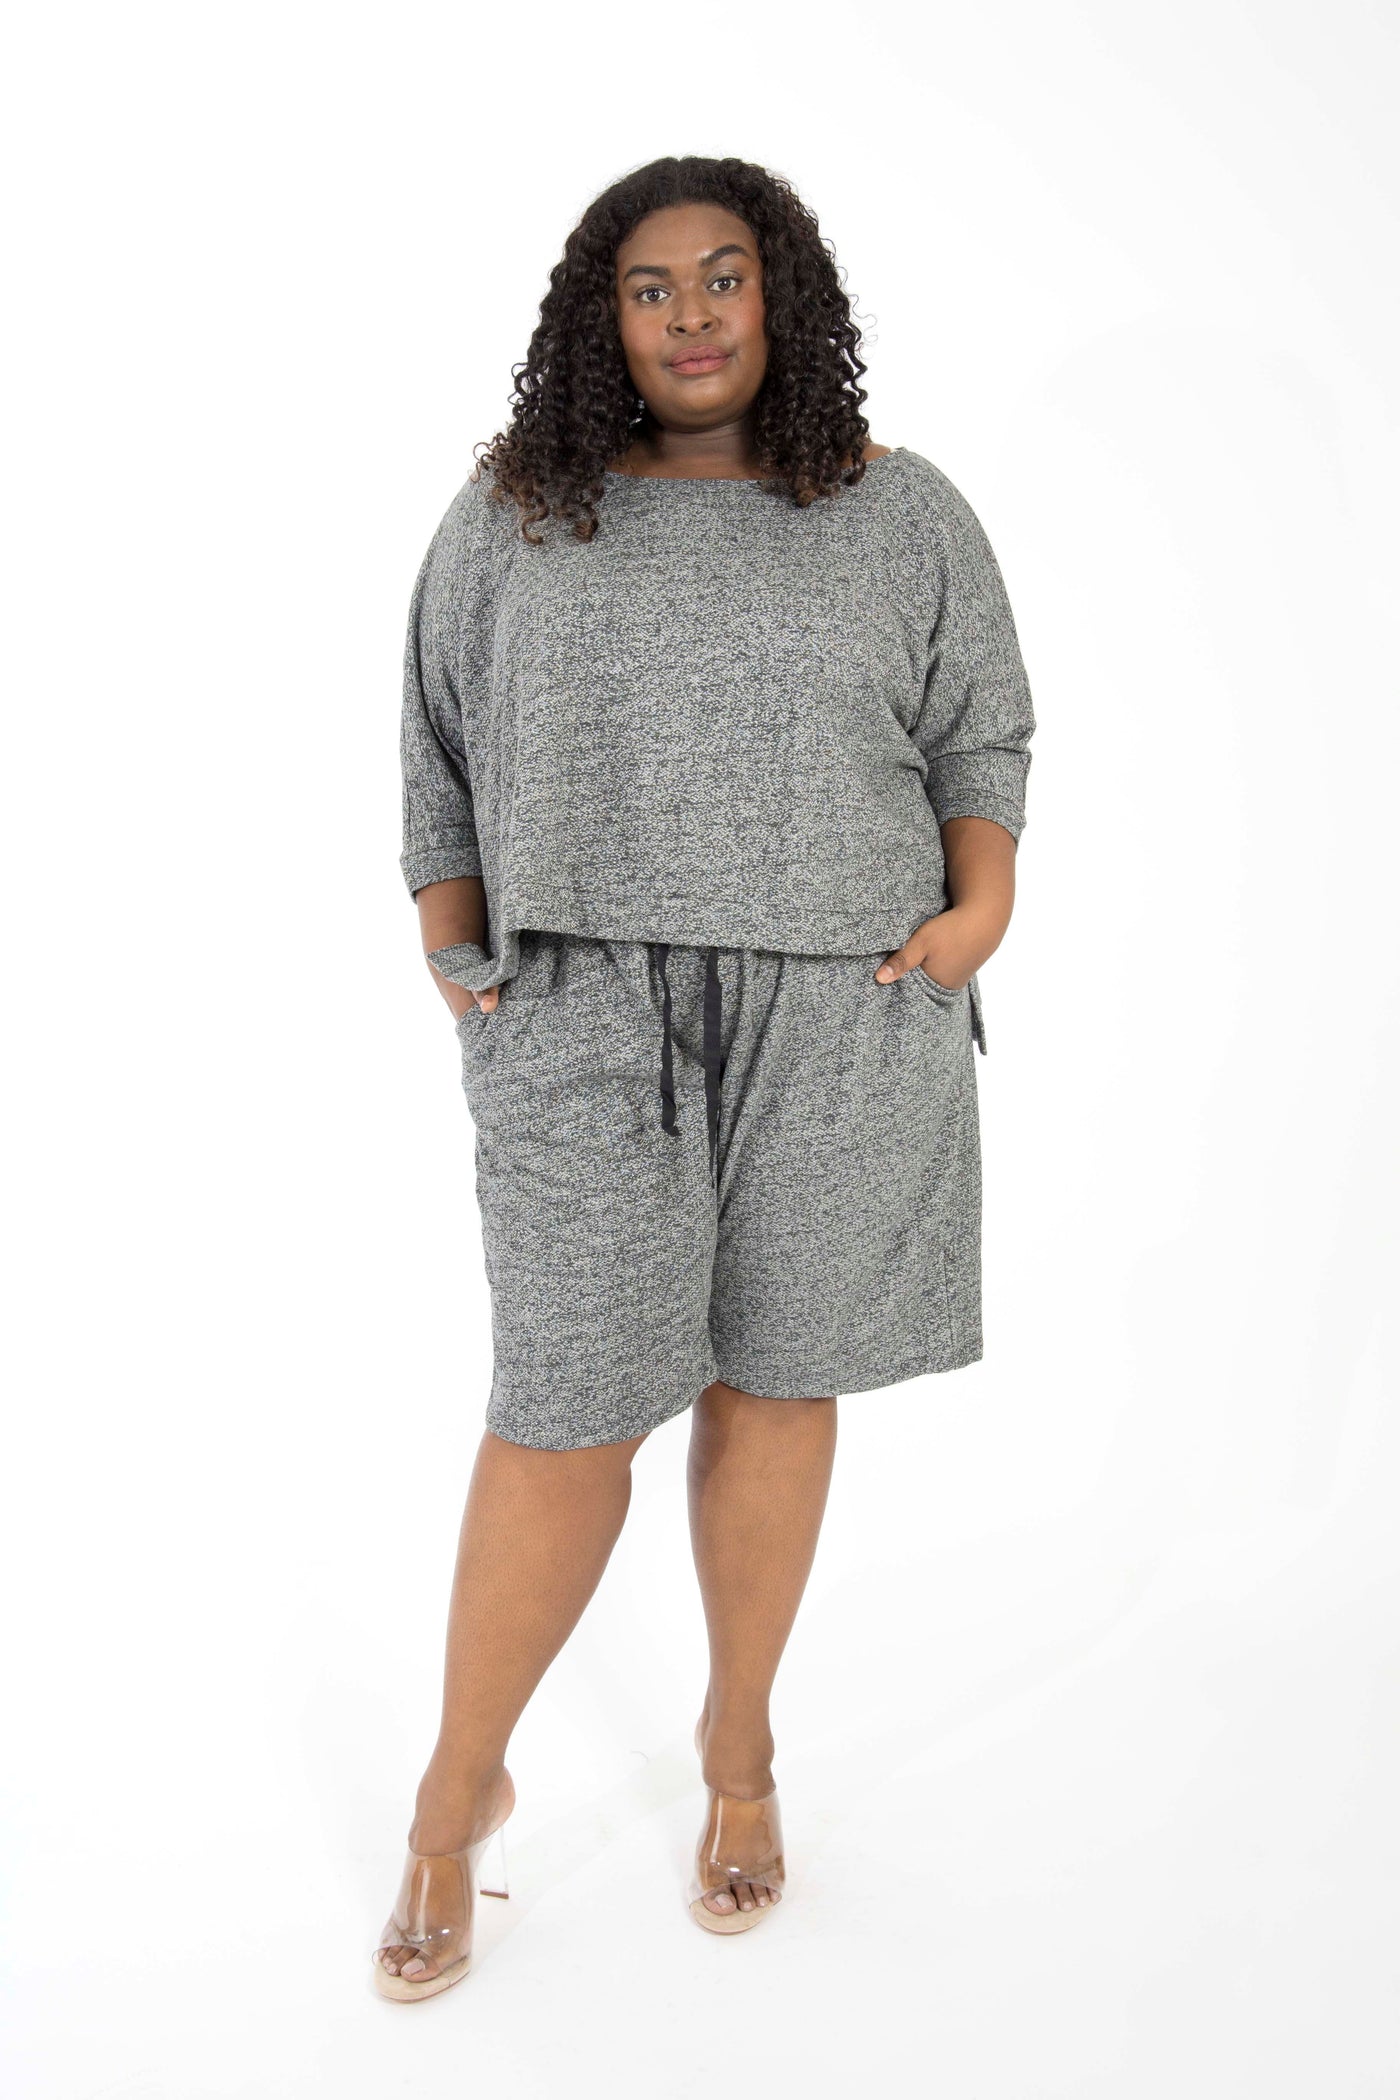 The Something the Lord Made French Terry Two Piece in Mottled Dark Grey with Side pocket